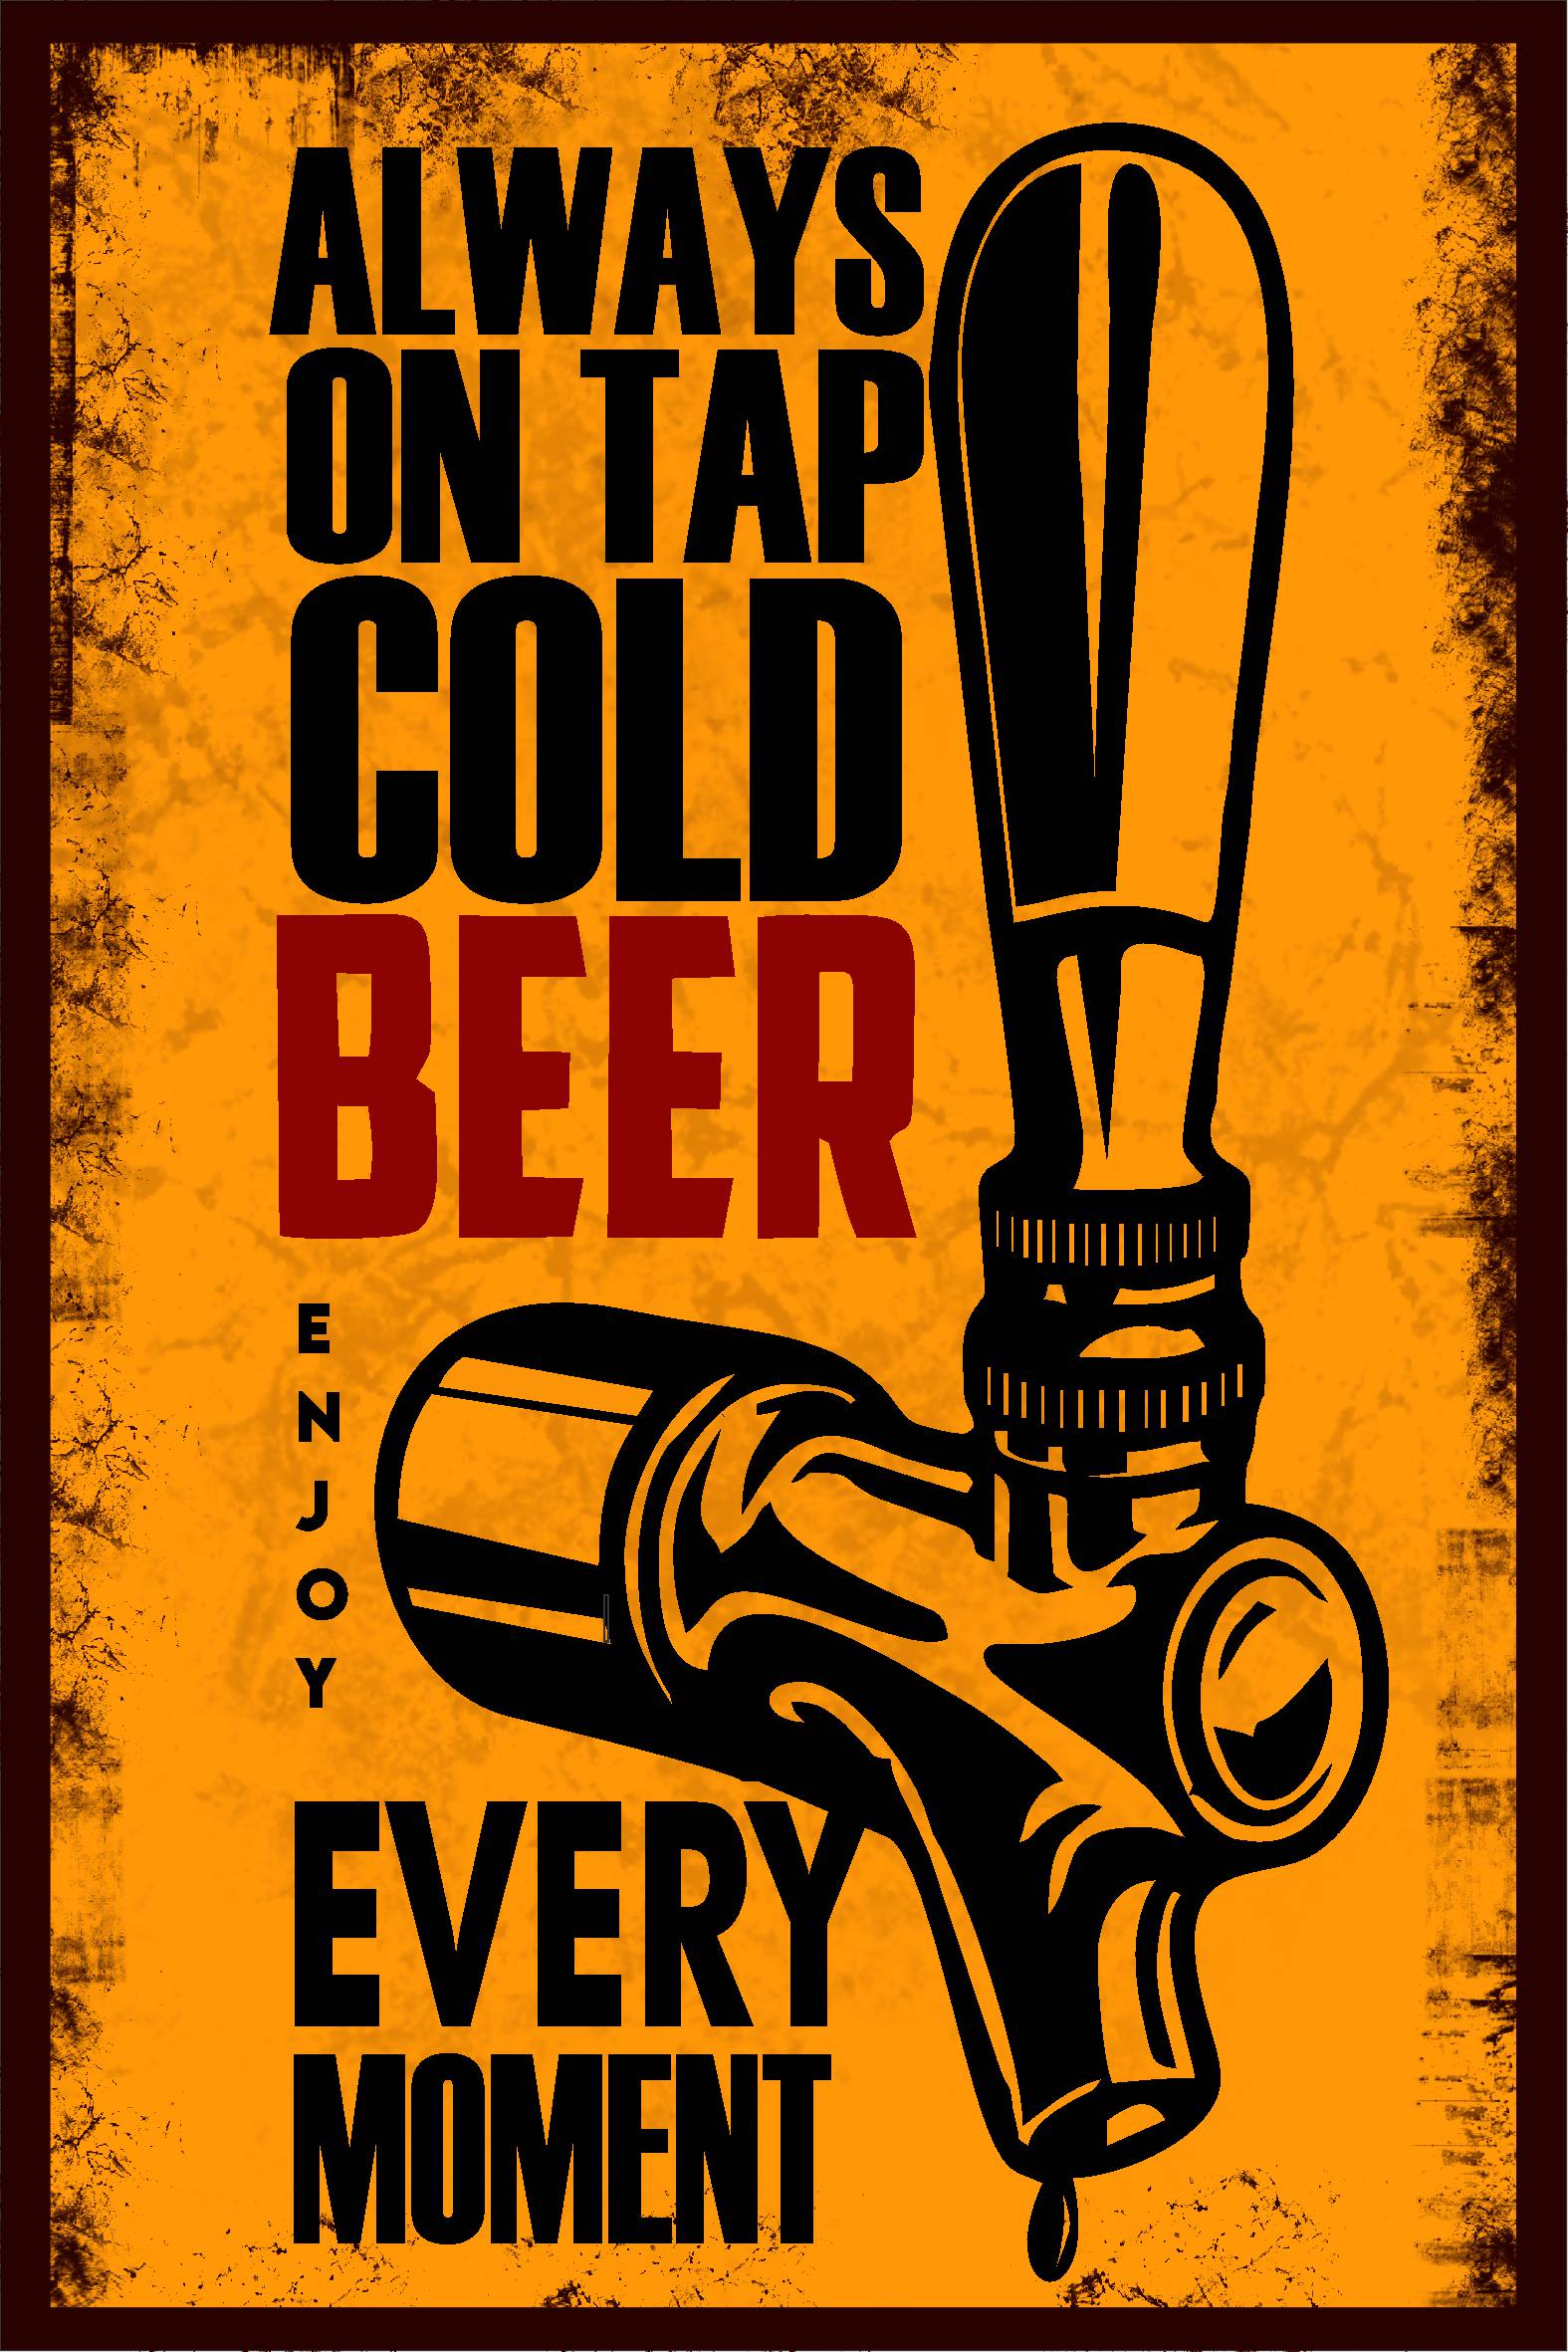 Always on tap cold beer - enjoy every moment